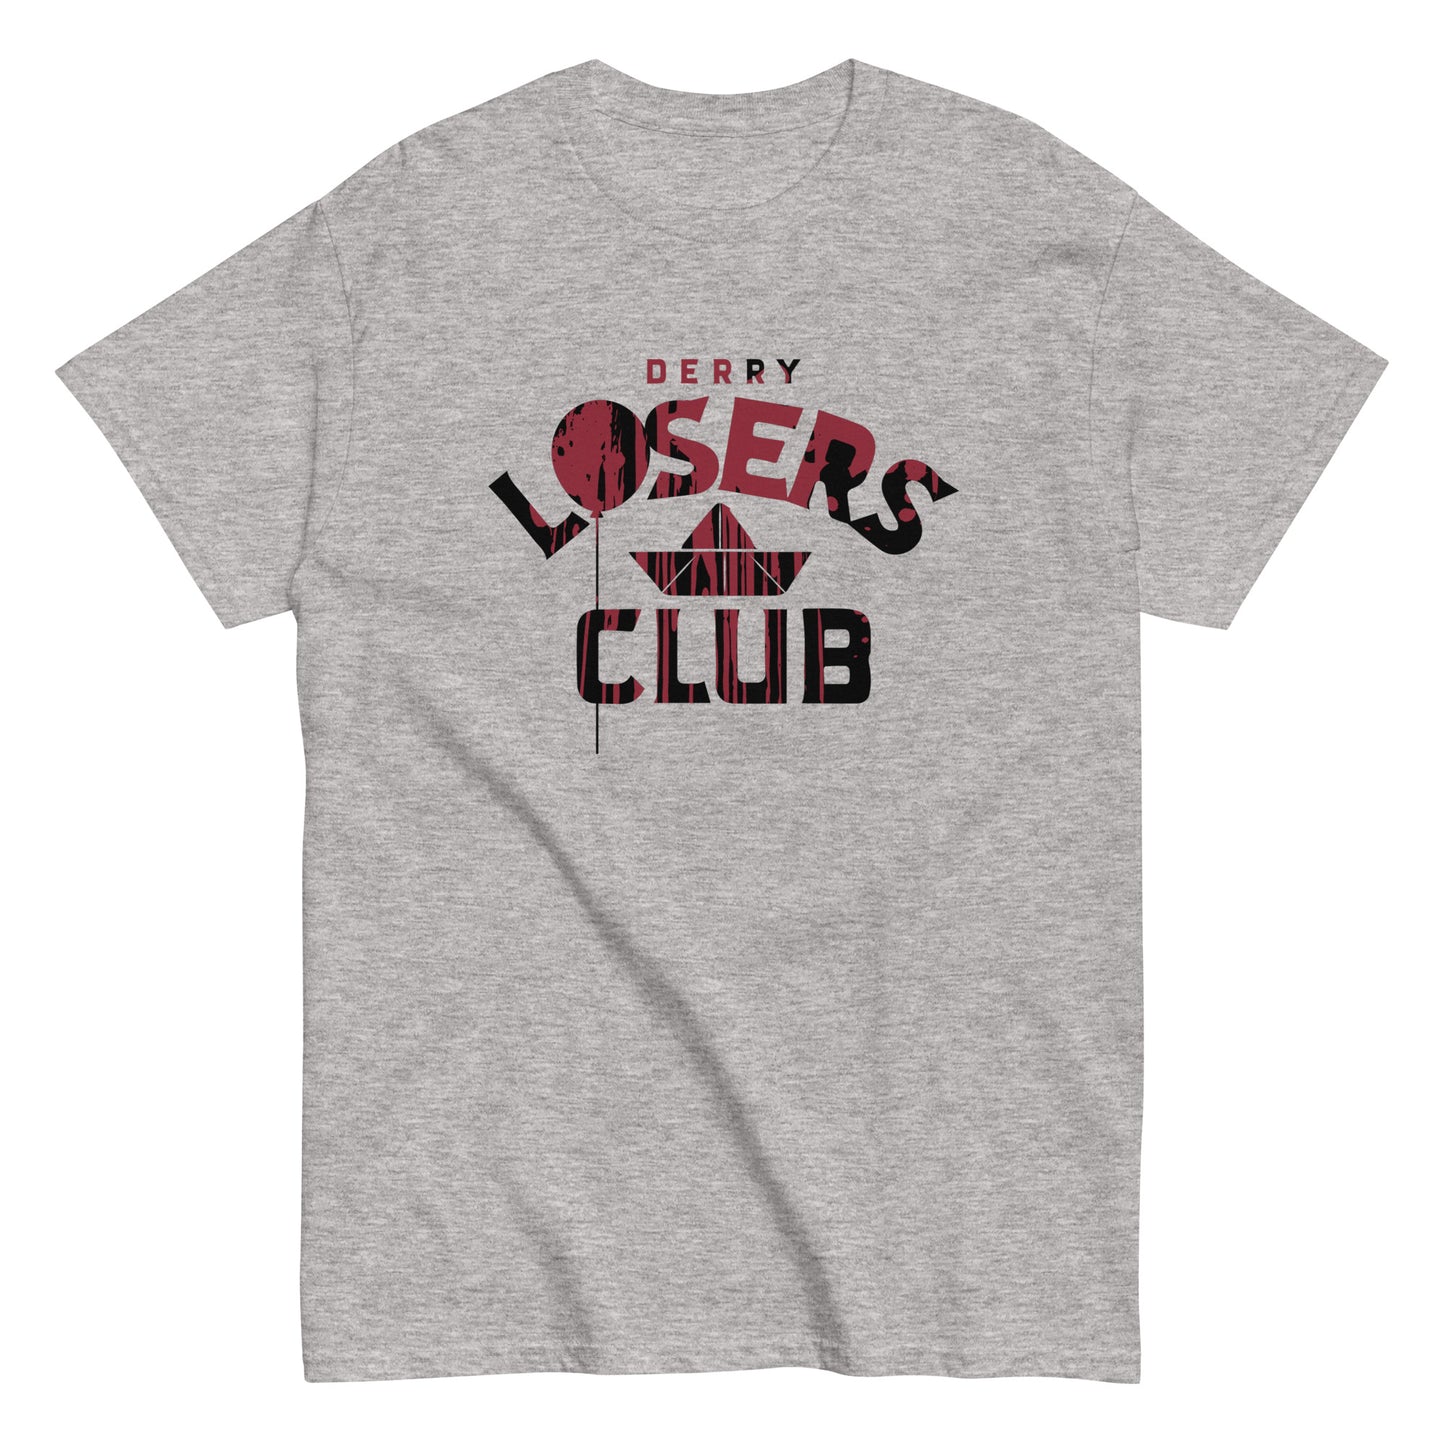 Derry Losers Club Men's Classic Tee